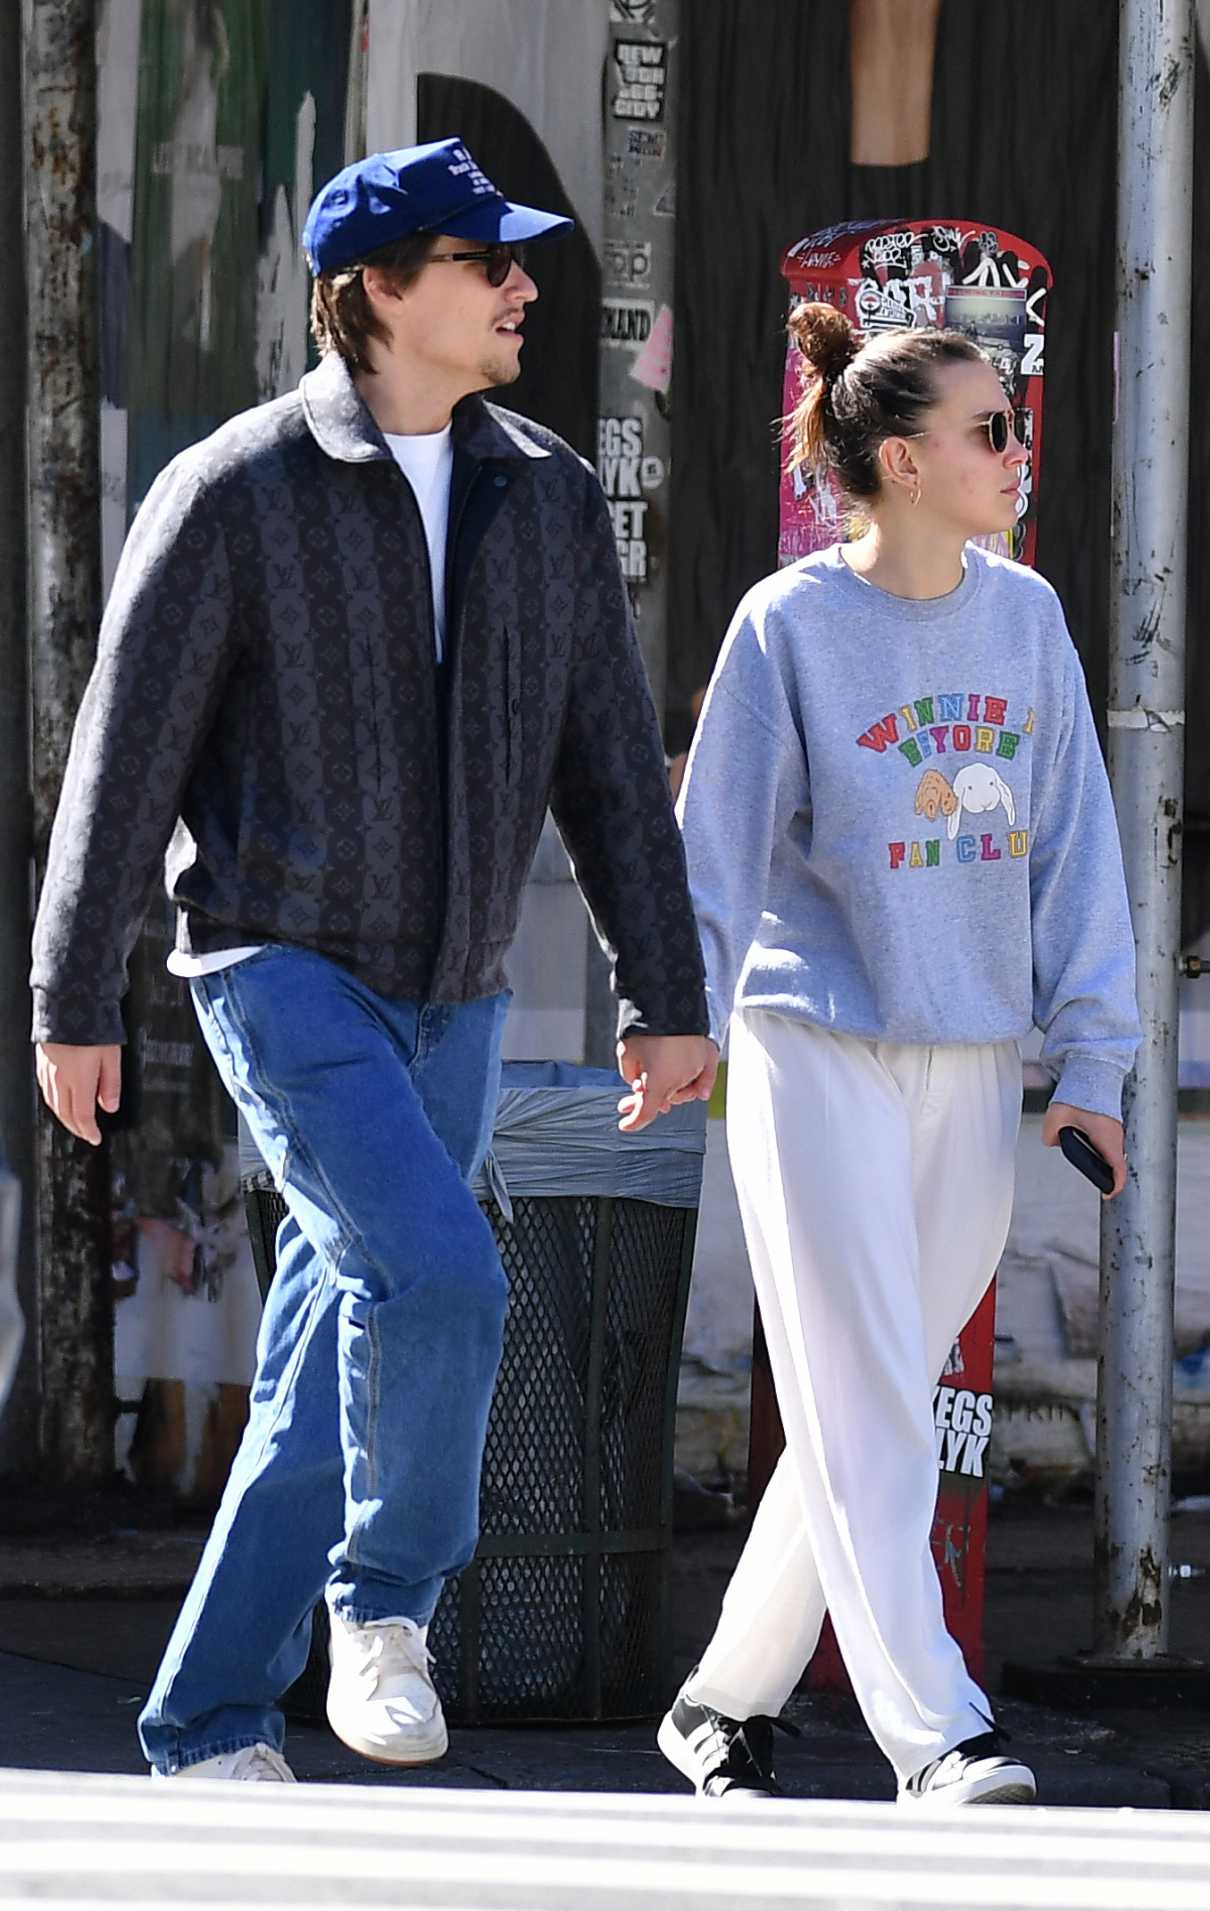 Millie Bobby Brown in a White Sweatpants